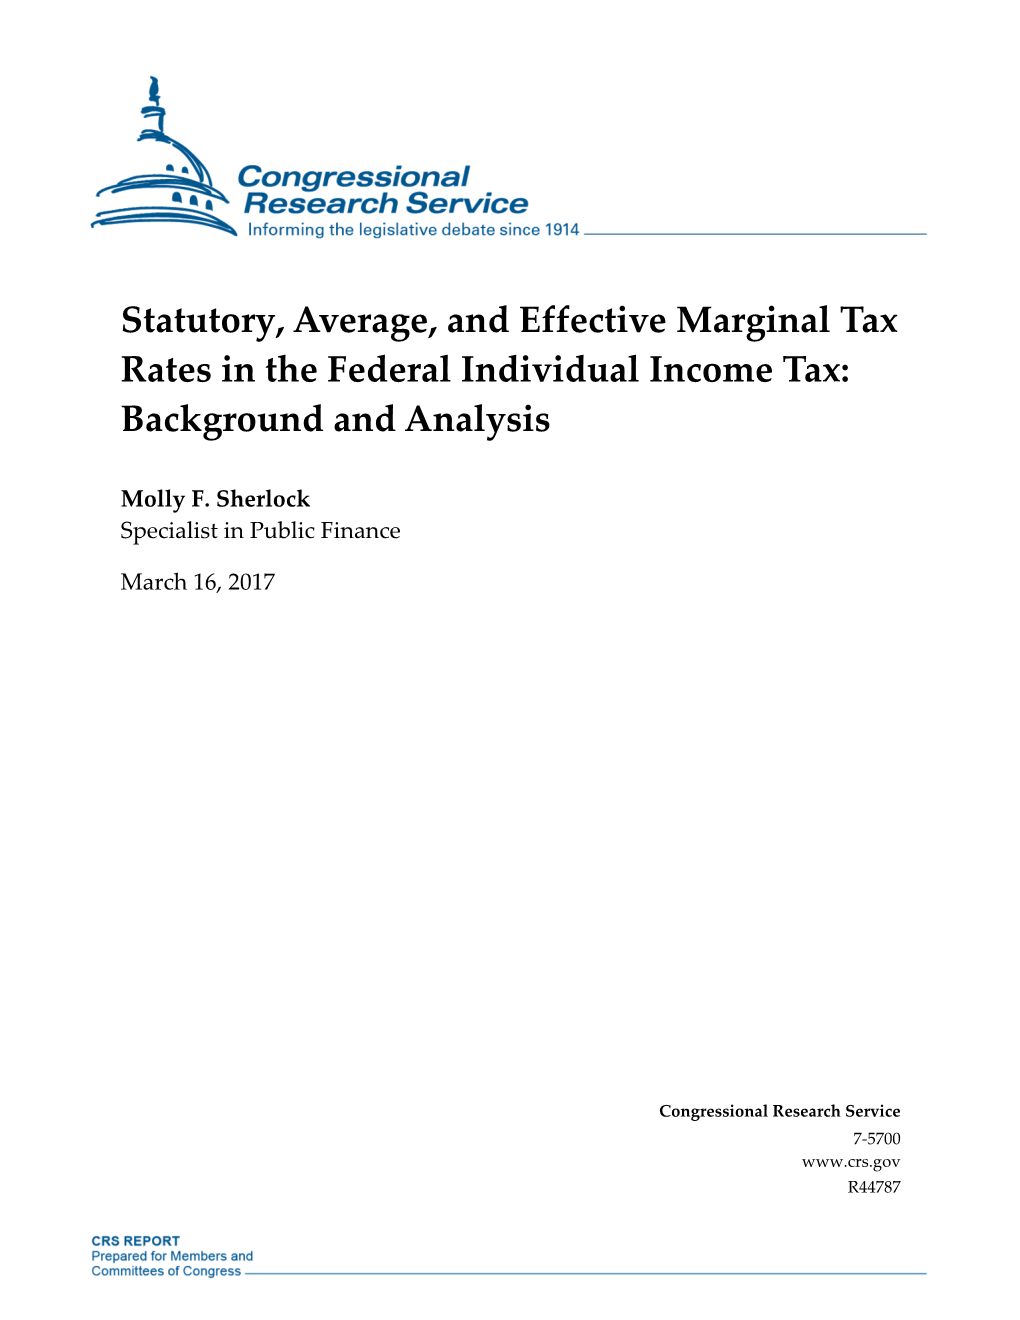 Statutory, Average, and Effective Marginal Tax Rates in the Federal Individual Income Tax: Background and Analysis